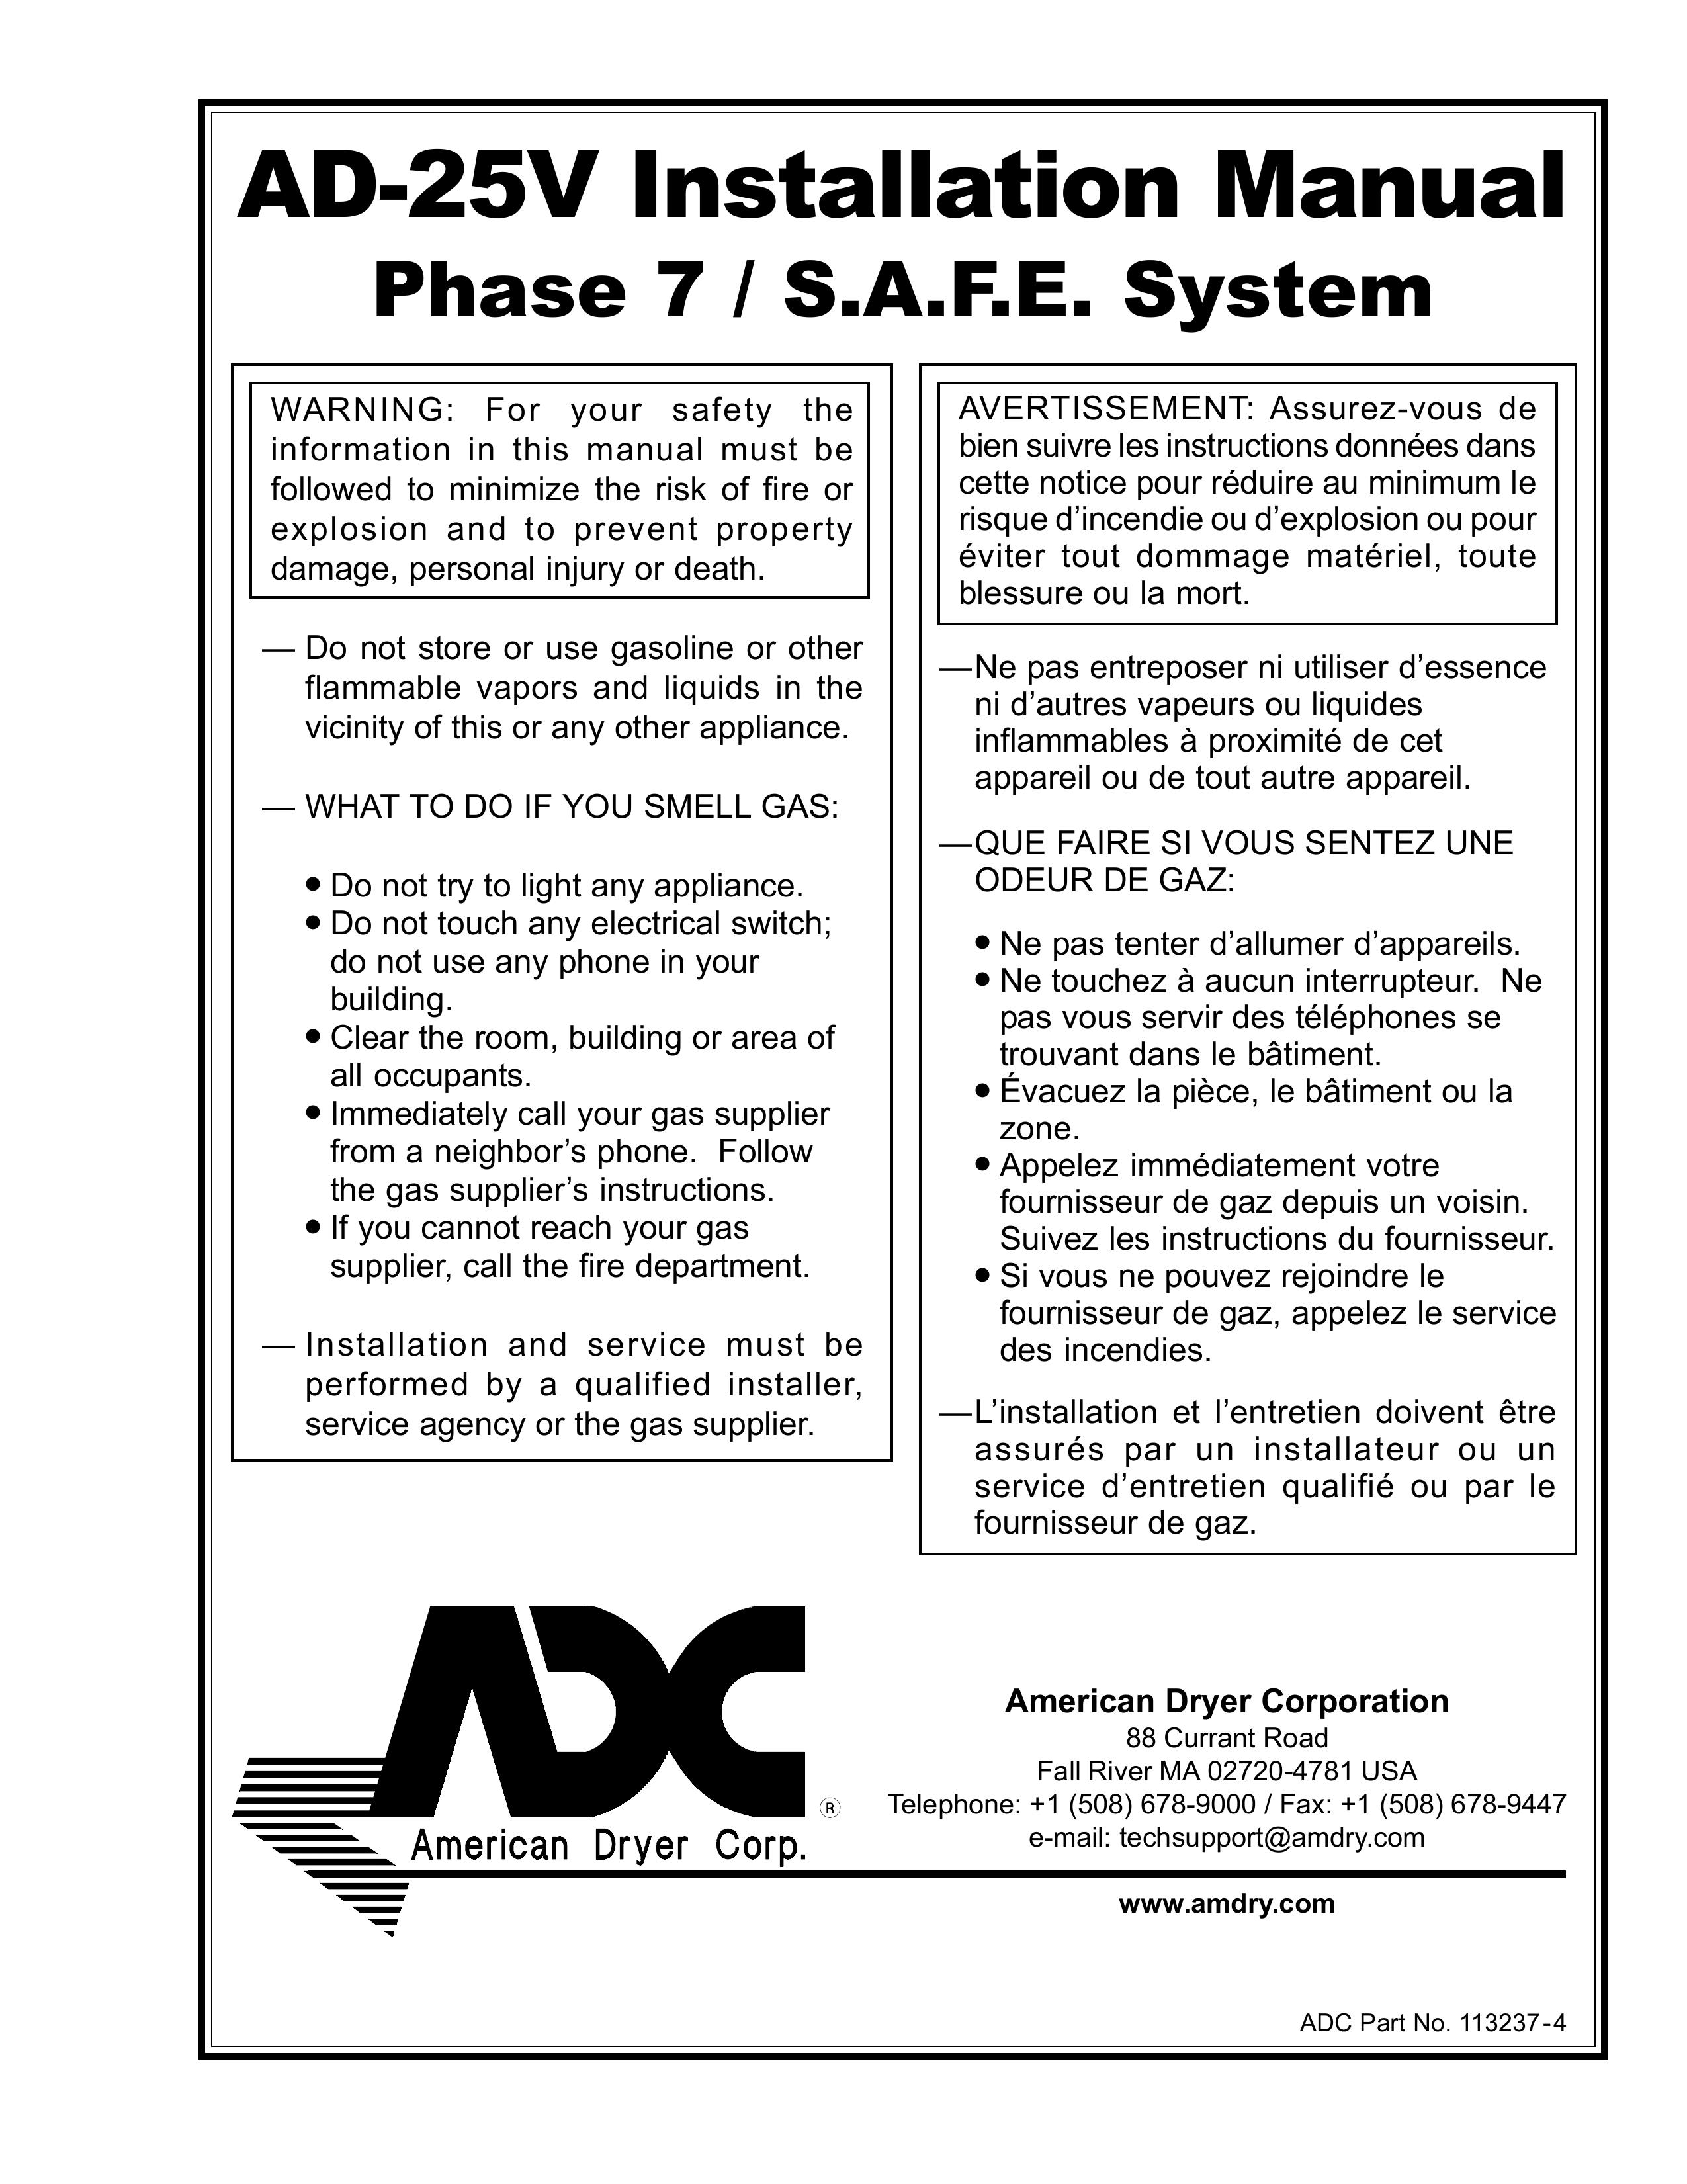 American Dryer Corp. AD-25V Clothes Dryer User Manual